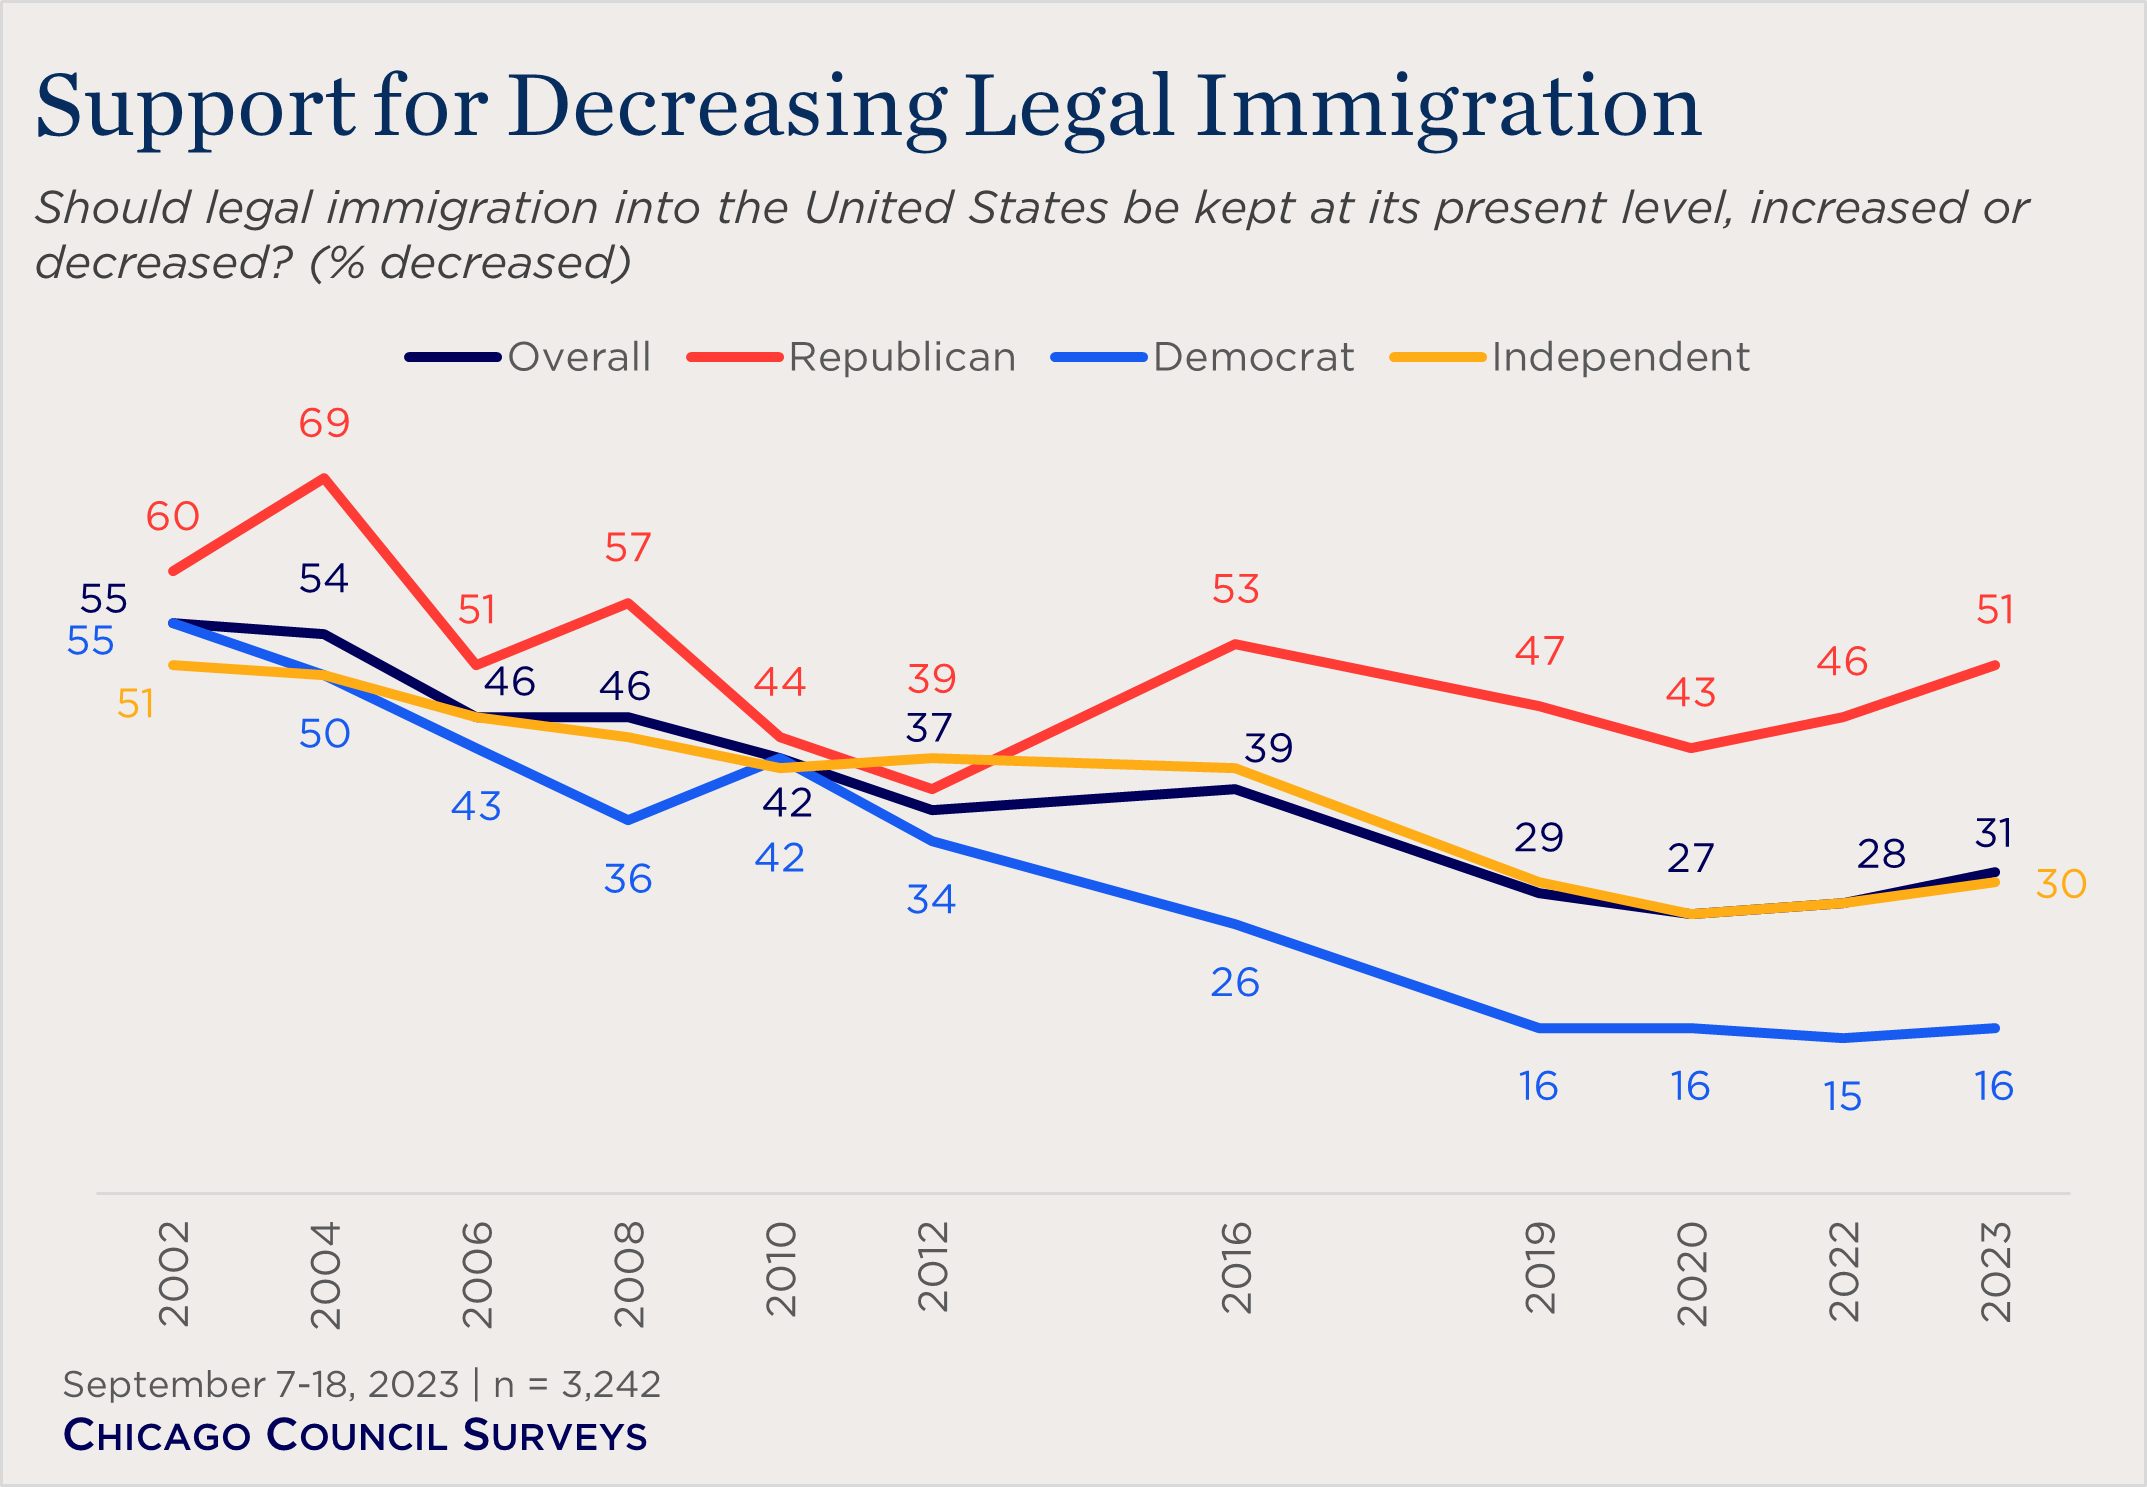 "line chart showing support for decreasing immigration levels"